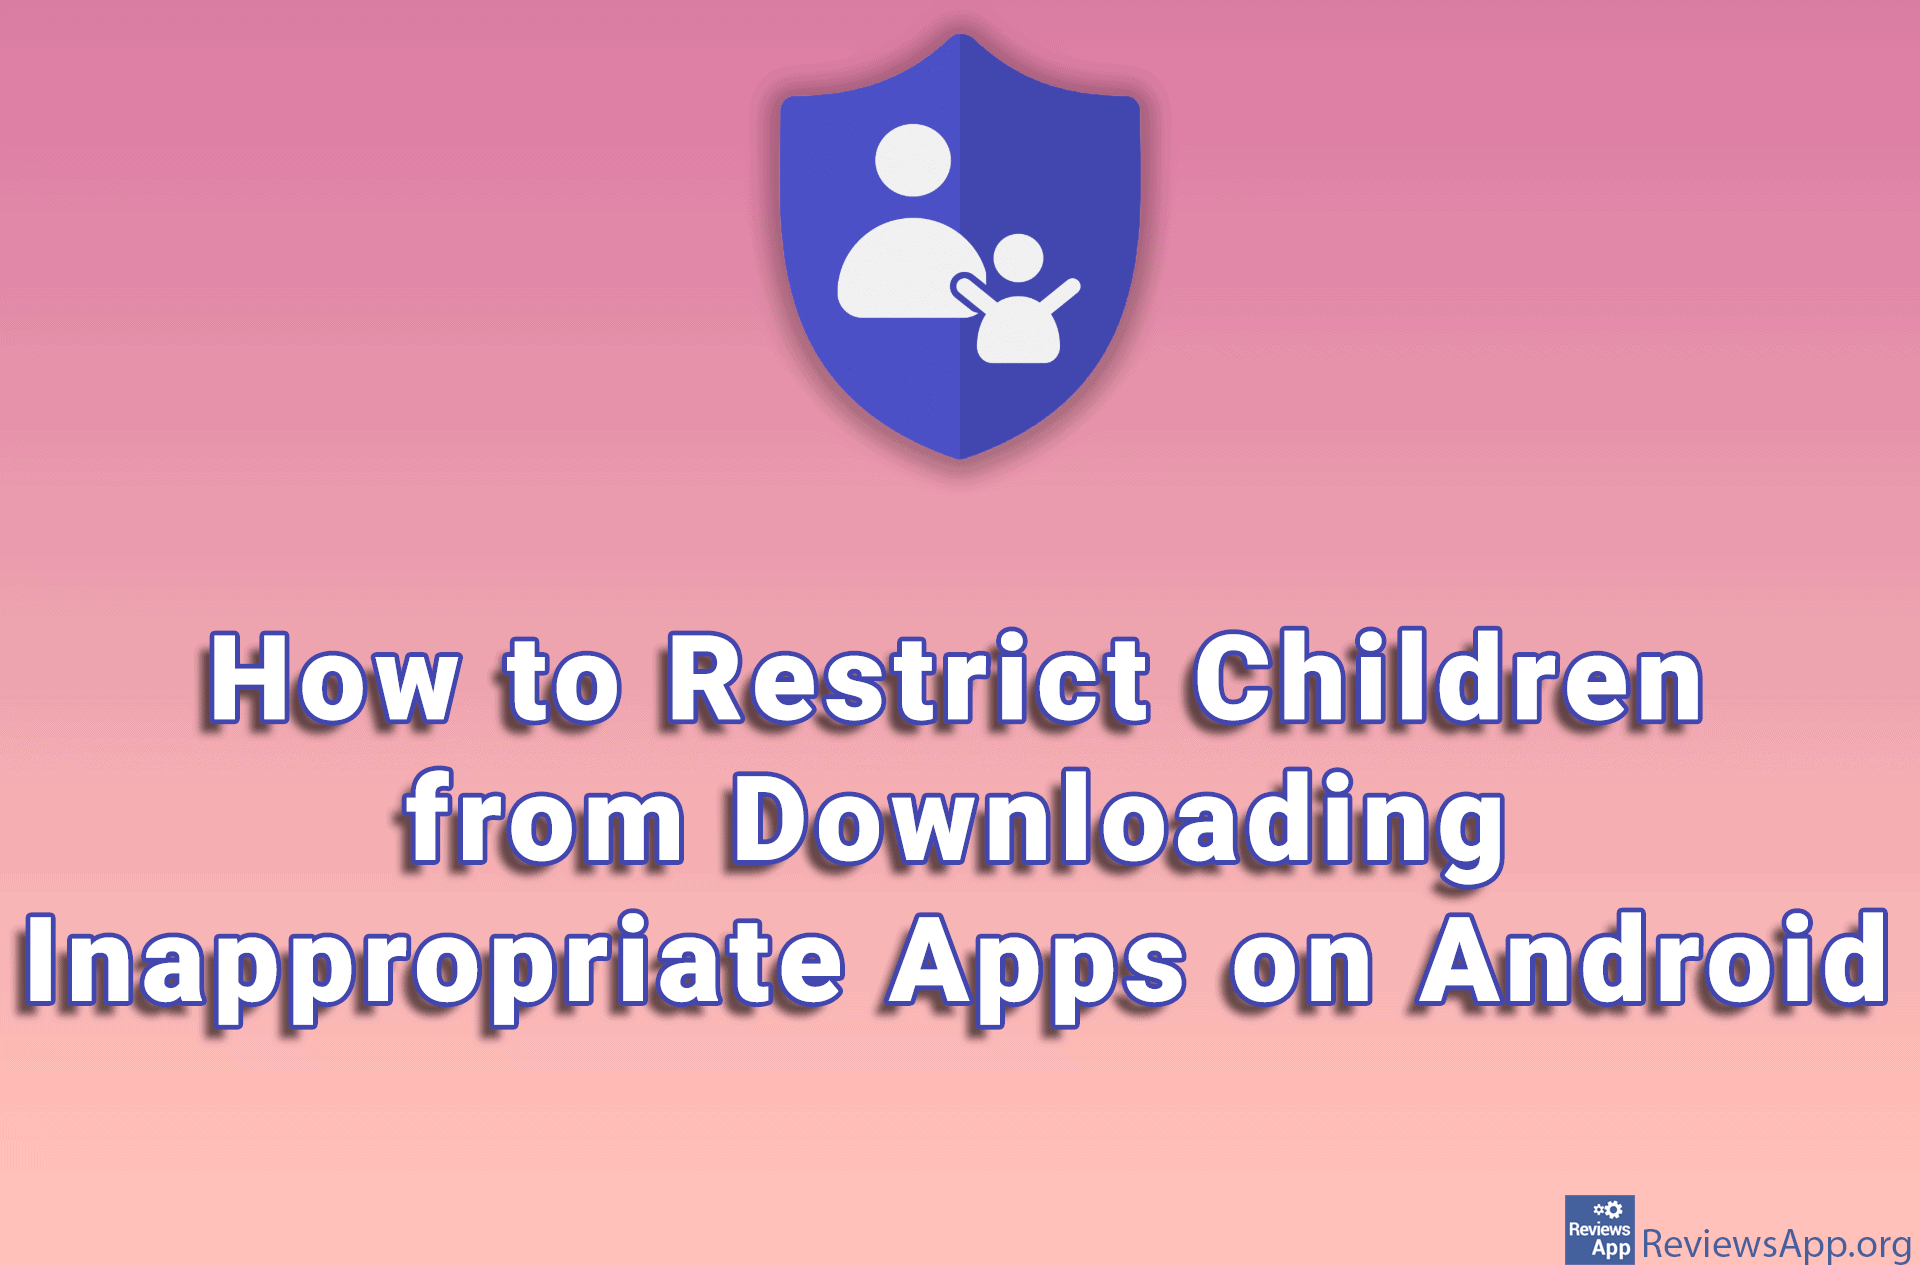 How to Restrict Children from Downloading Inappropriate Apps on Android